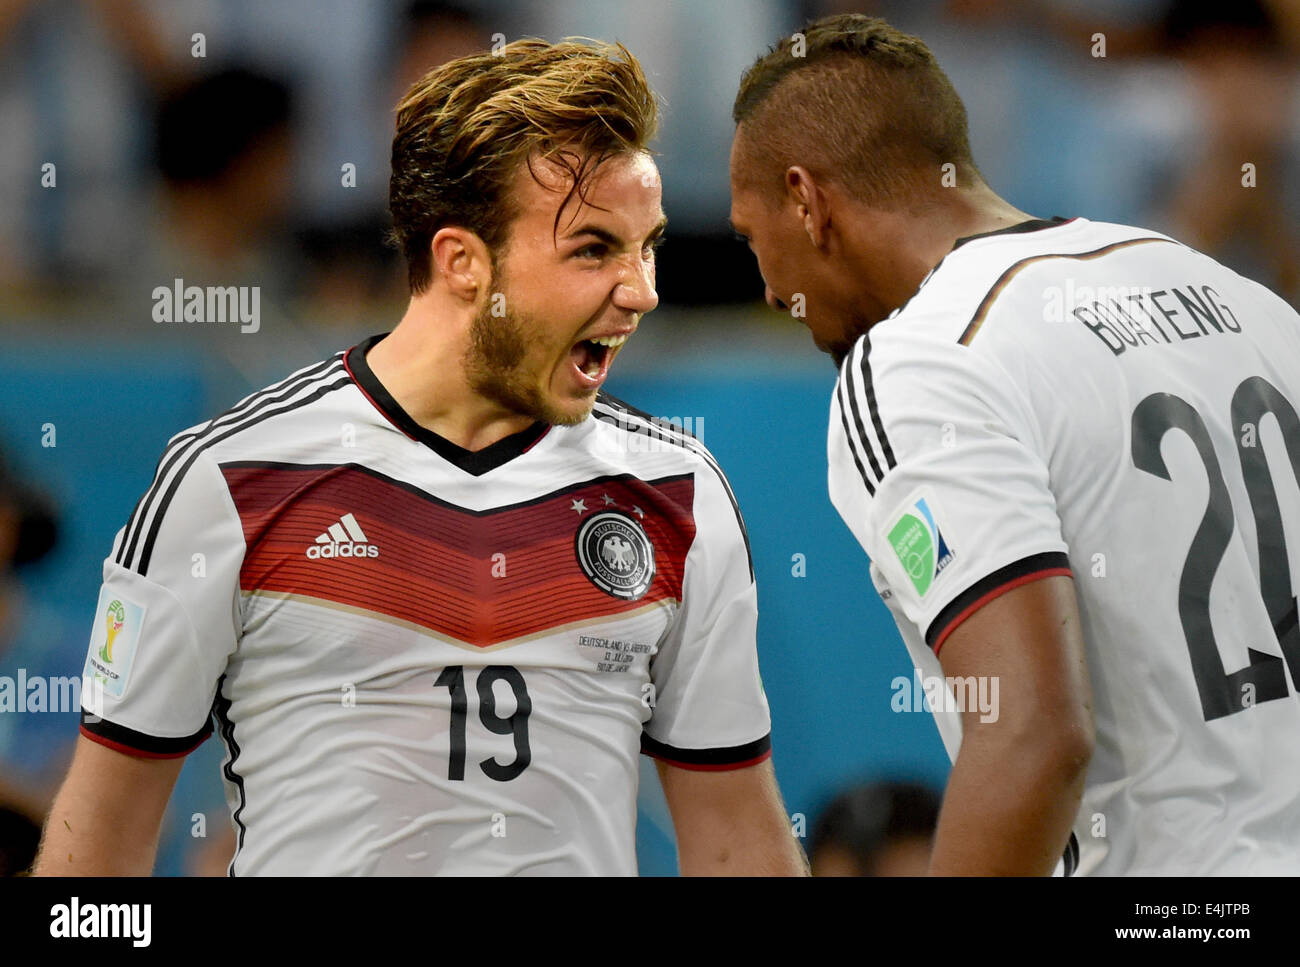 Rio de Janeiro, Brazil. 13th July, 2014. dpatopbilder Mario Goetze (L) of Germany celebrates with teammate Jerome Boateng after scoring 1-0 goal during the FIFA World Cup 2014 final soccer match between Germany and Argentina at the Estadio do Maracana in Rio de Janeiro, Brazil, 13 July 2014. Photo: Marcus Brandt/dpa/Alamy Live News Stock Photo